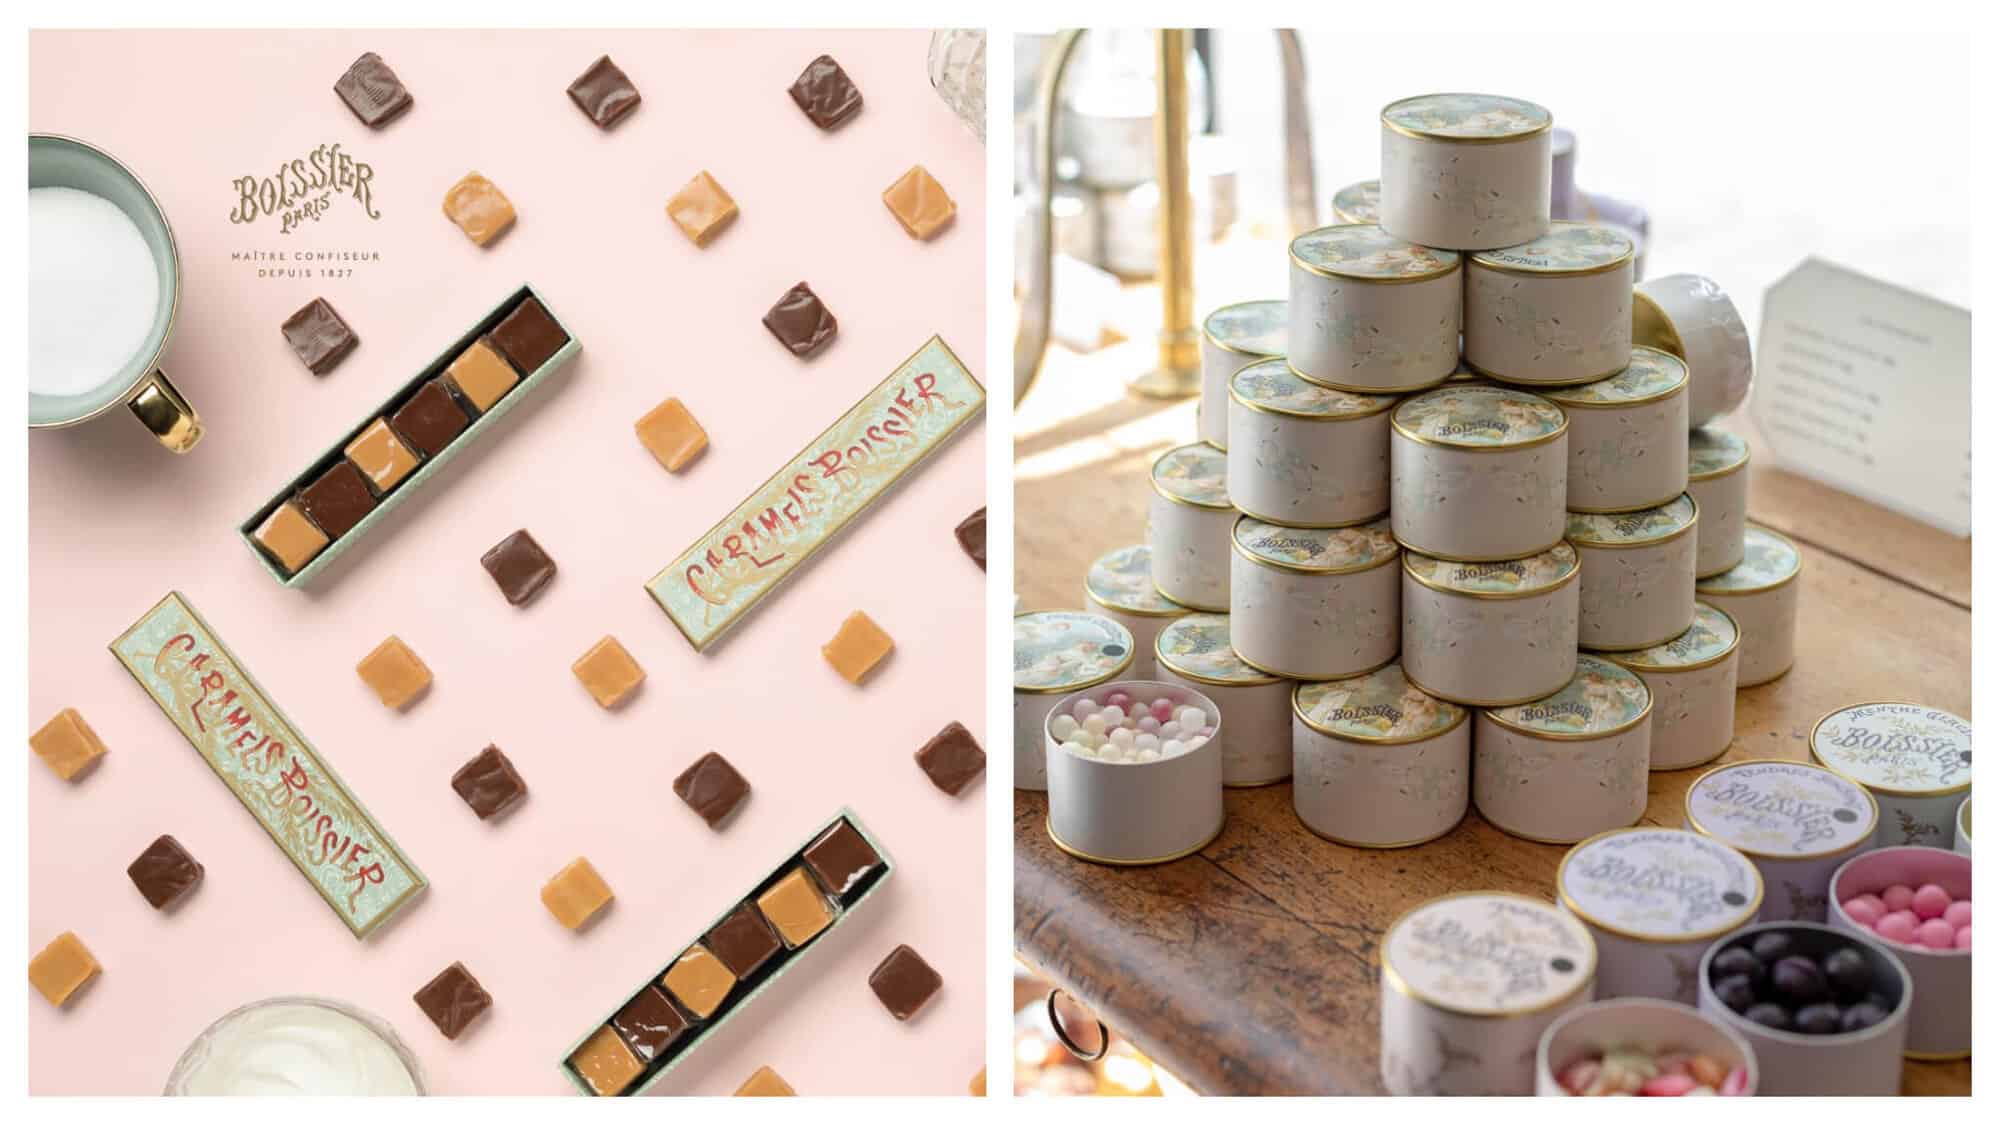 Left: an aerial view of chocolates and caramels. Some are in small boxes and others are on the pink table. "Caramel Boissier" is written on the boxes. There is also a cup of milk visible in the top left corner. Left: a stack of circular tins filled with candy. The candy is pink, white, cream, and purple.